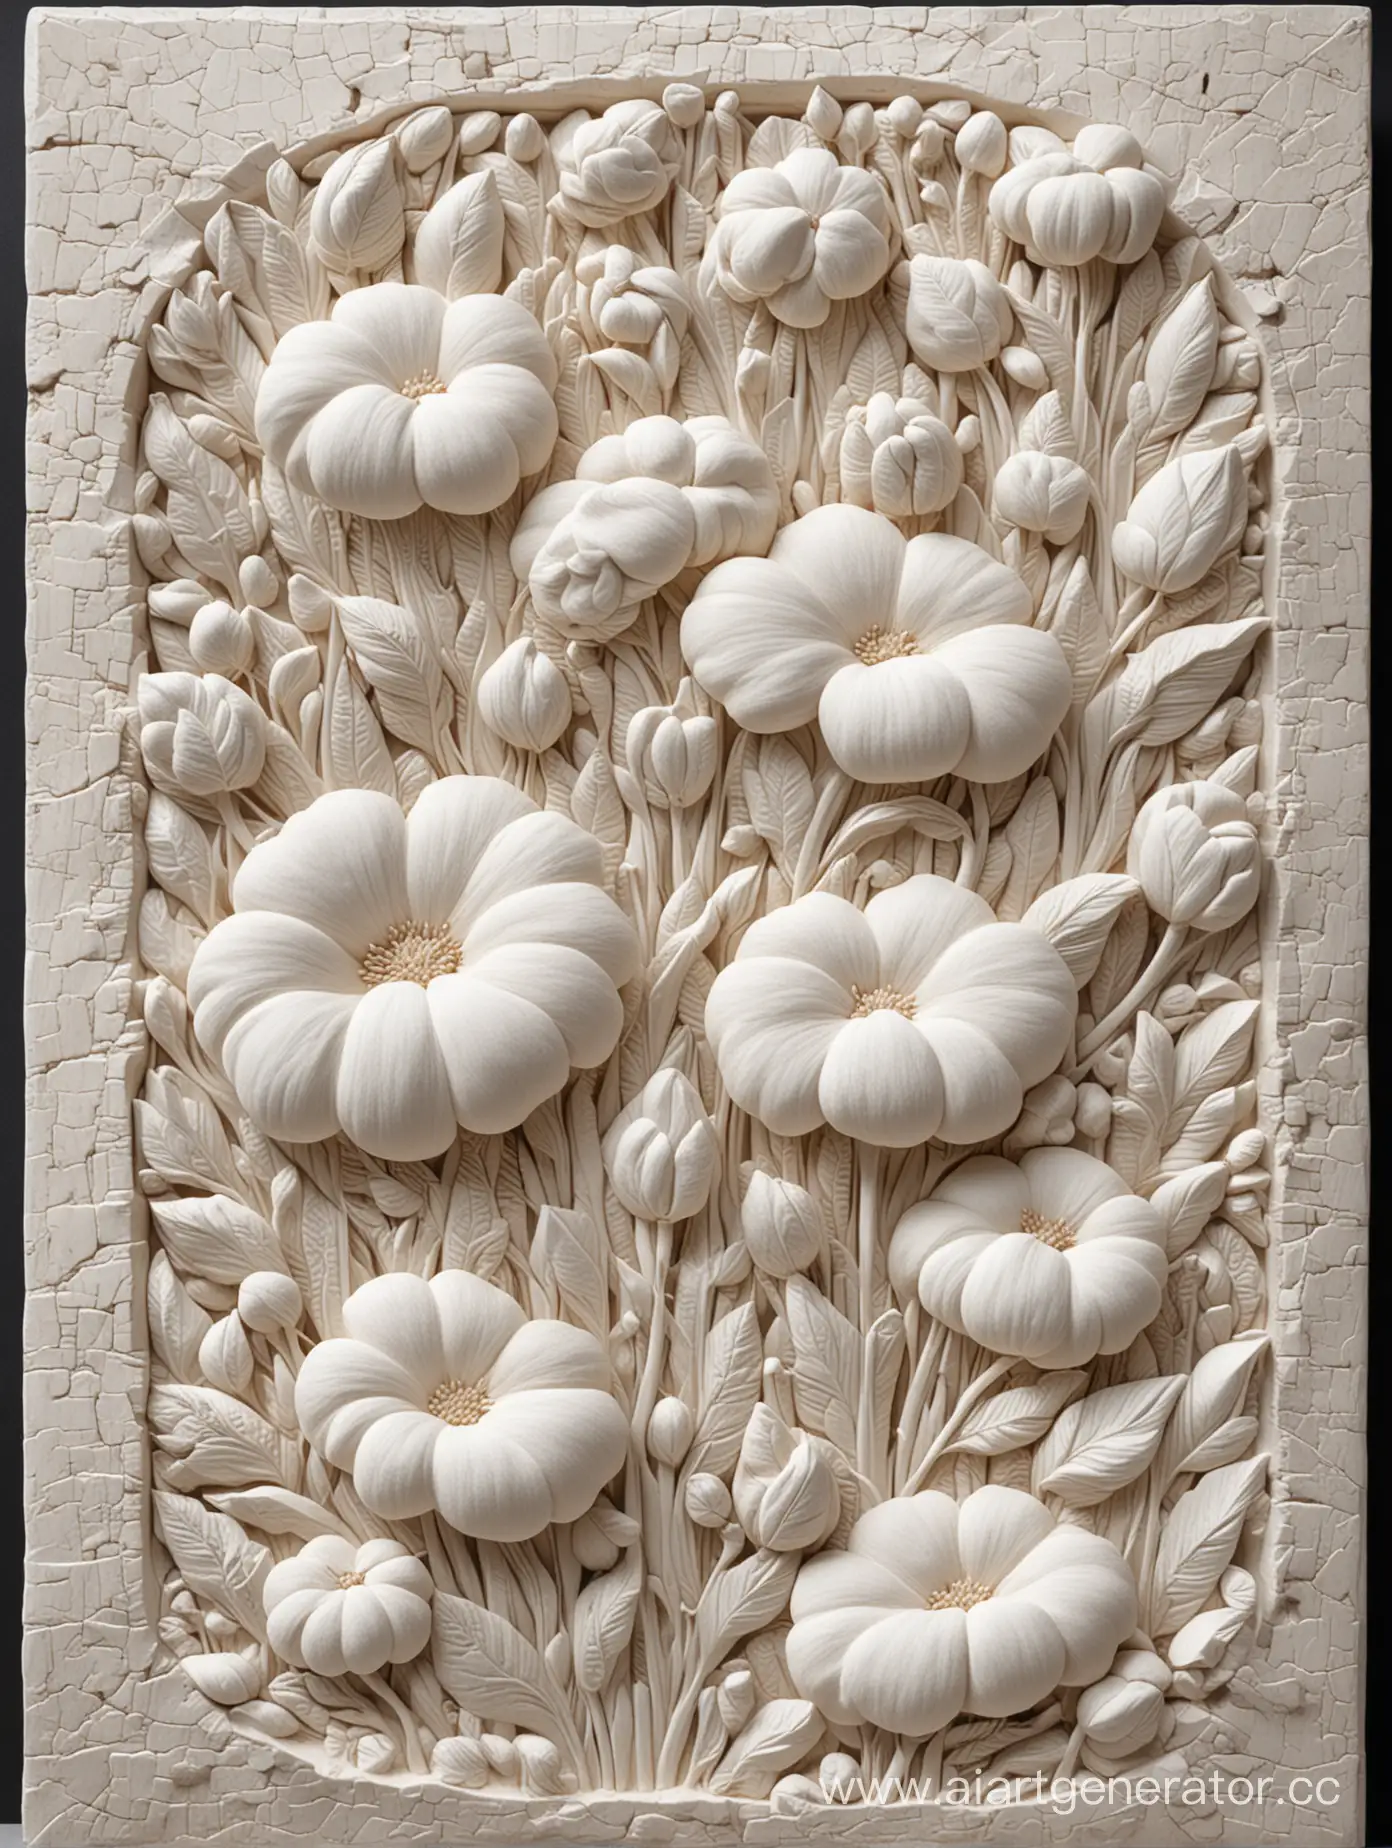 Stone-Carved-Basrelief-Sculpture-of-Cotton-Field